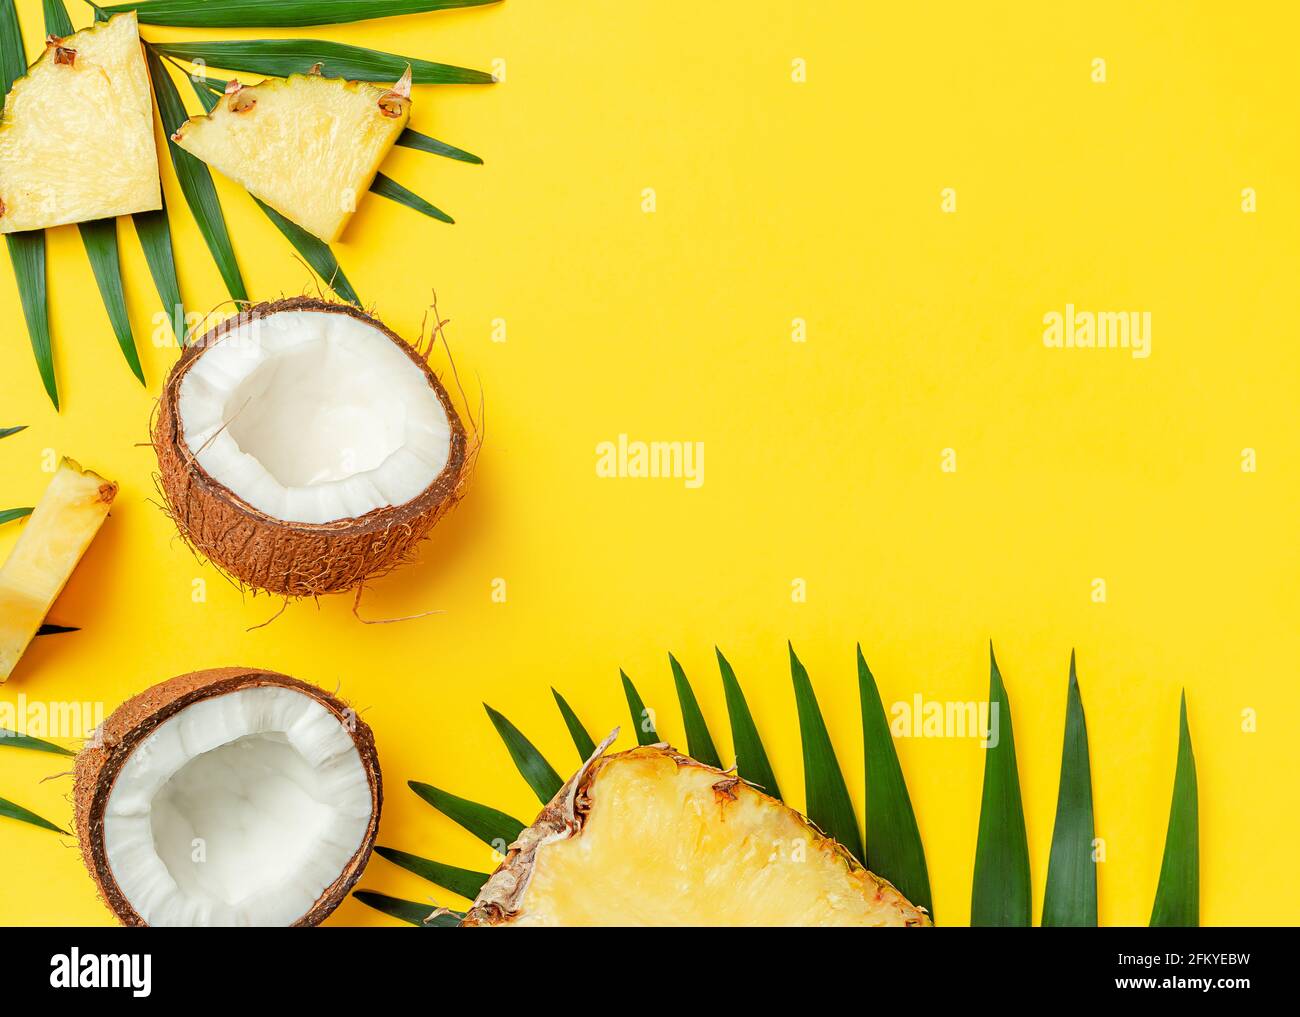 Broken coconut and pineapple slices on bright yellow background. Flat lay, copy space. Stock Photo